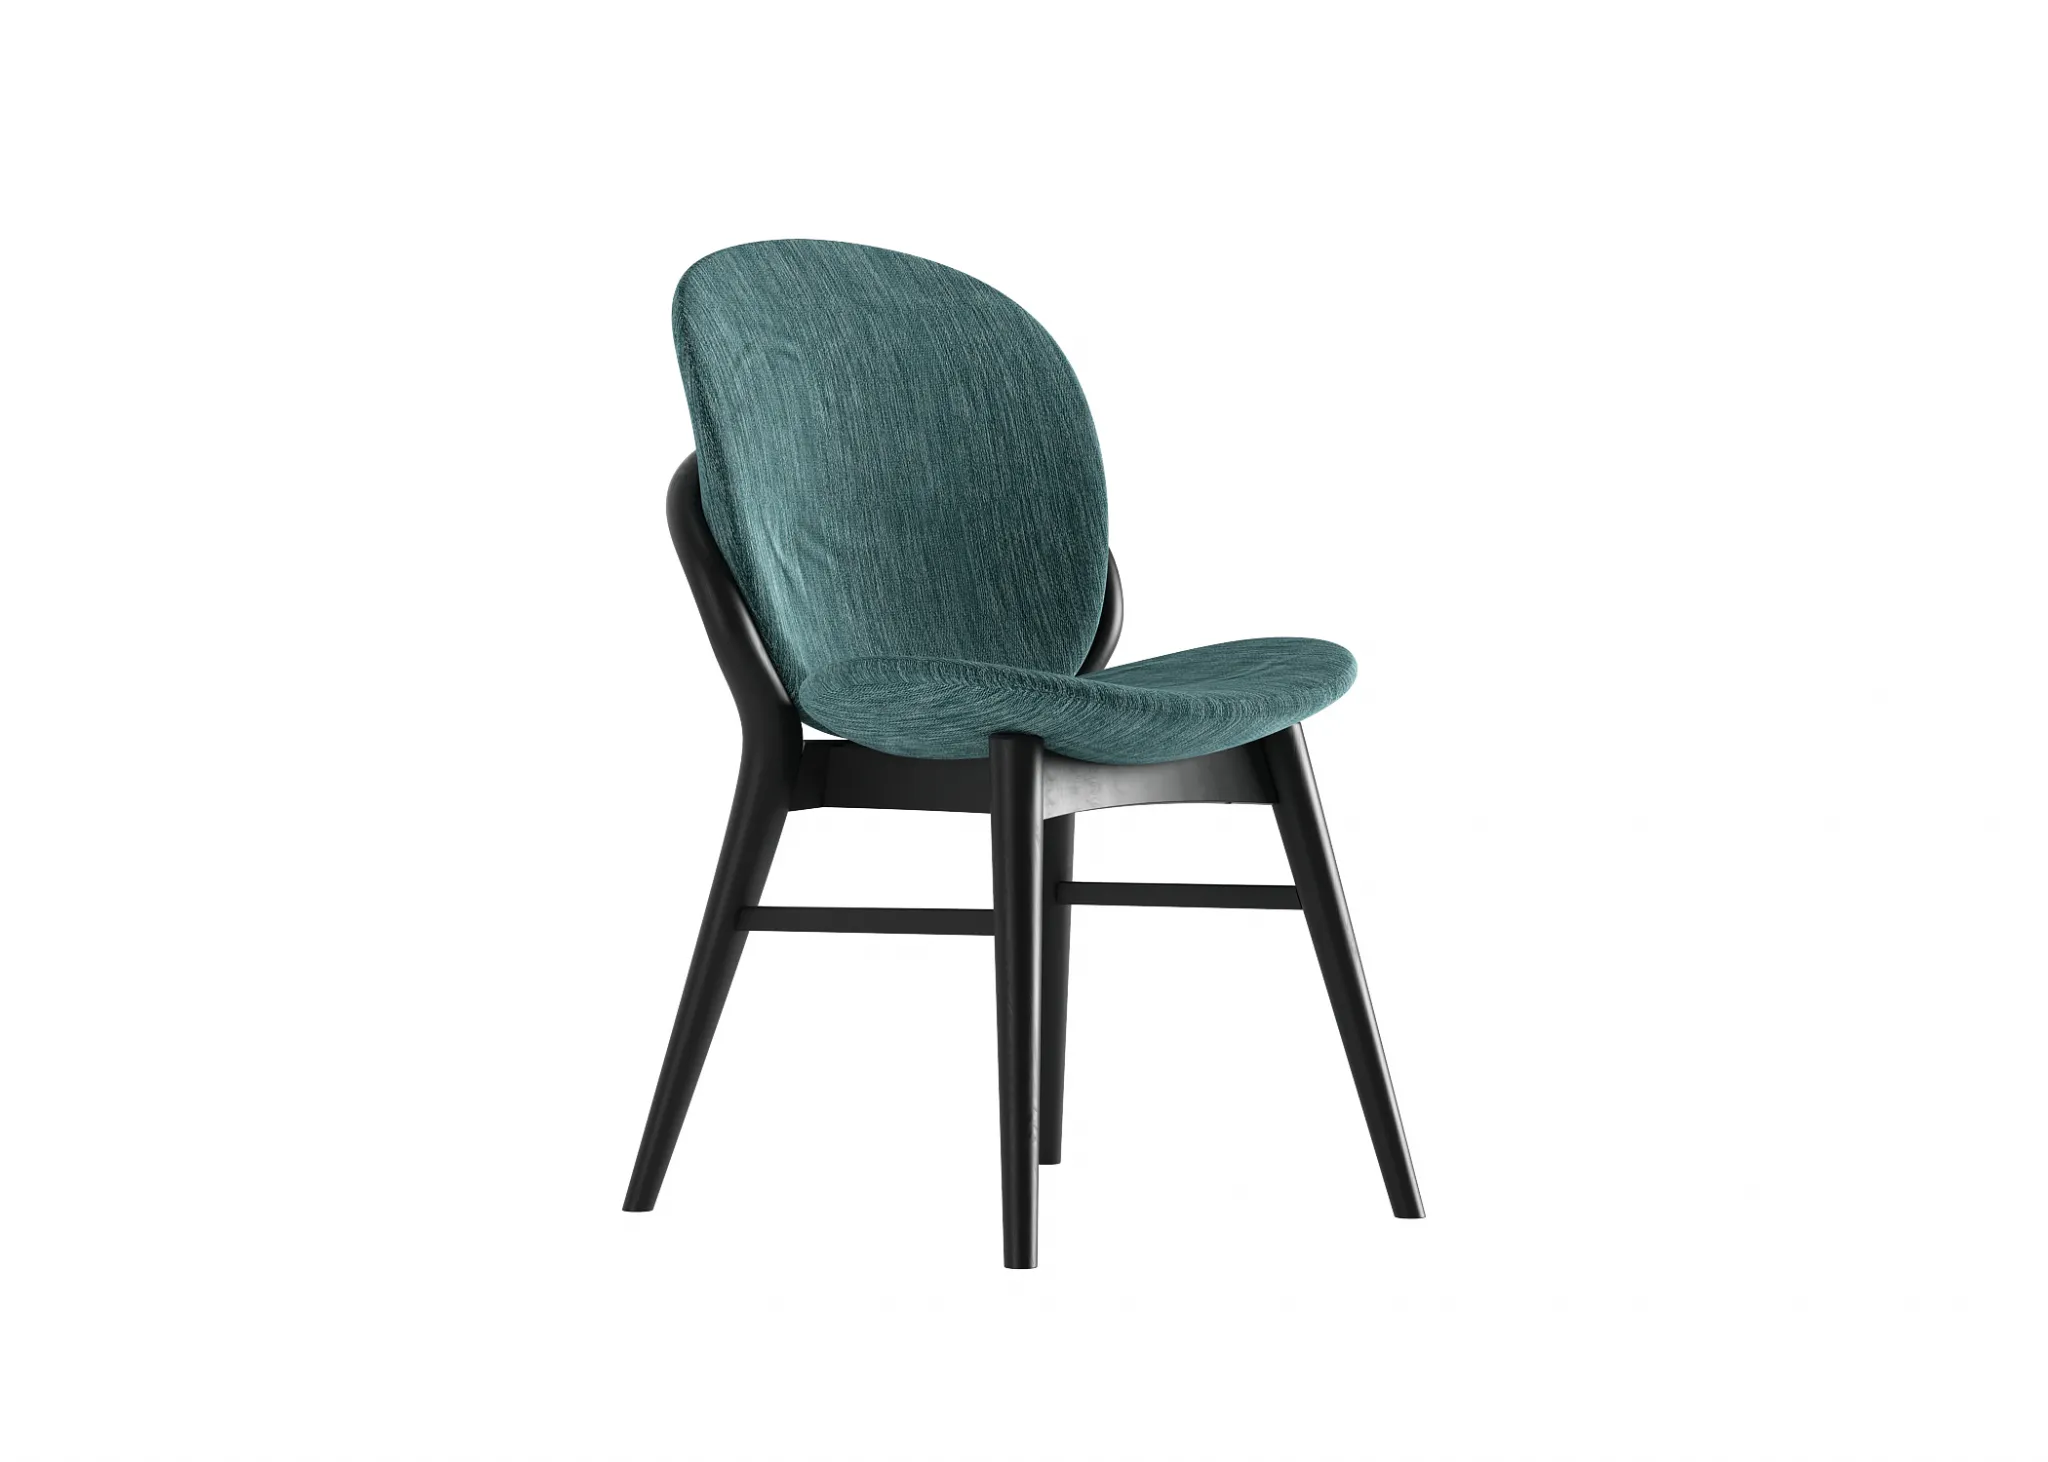 FURNITURE 3D MODELS – CHAIRS – 0505